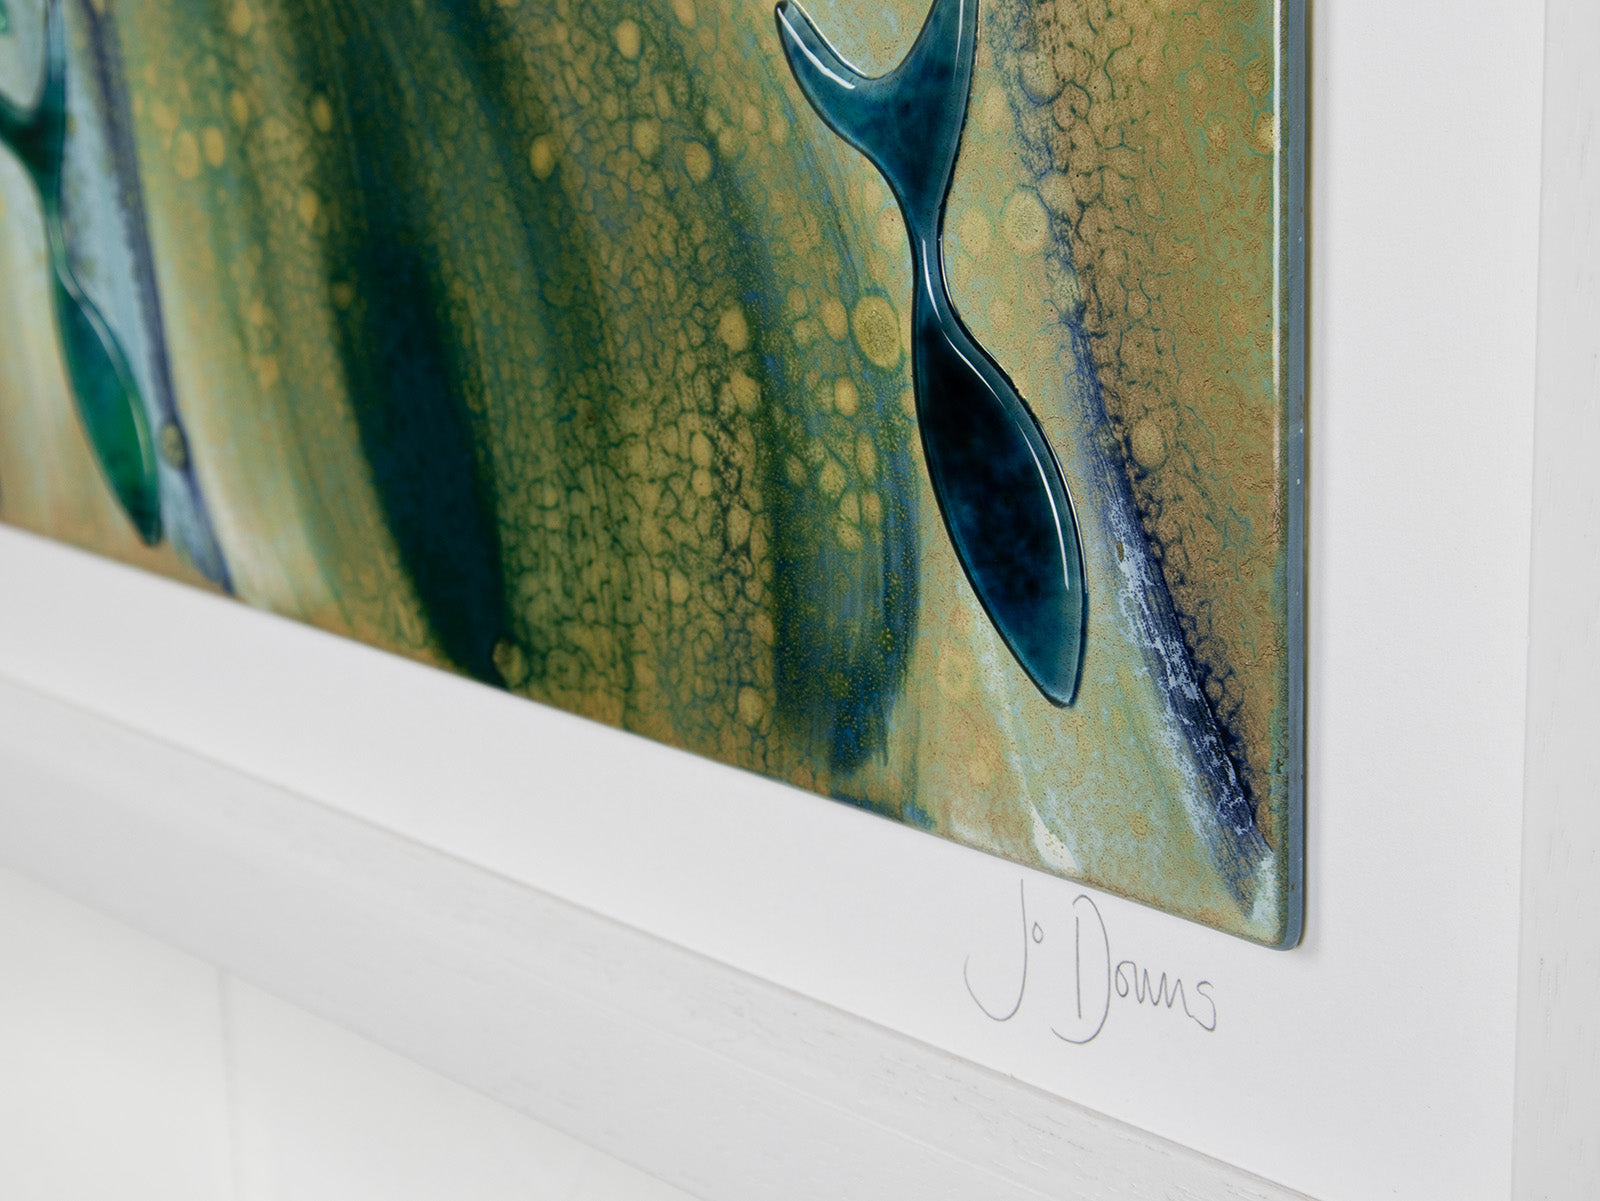 Jo Downs Signature Ocean Forest Extra Large Art Frame